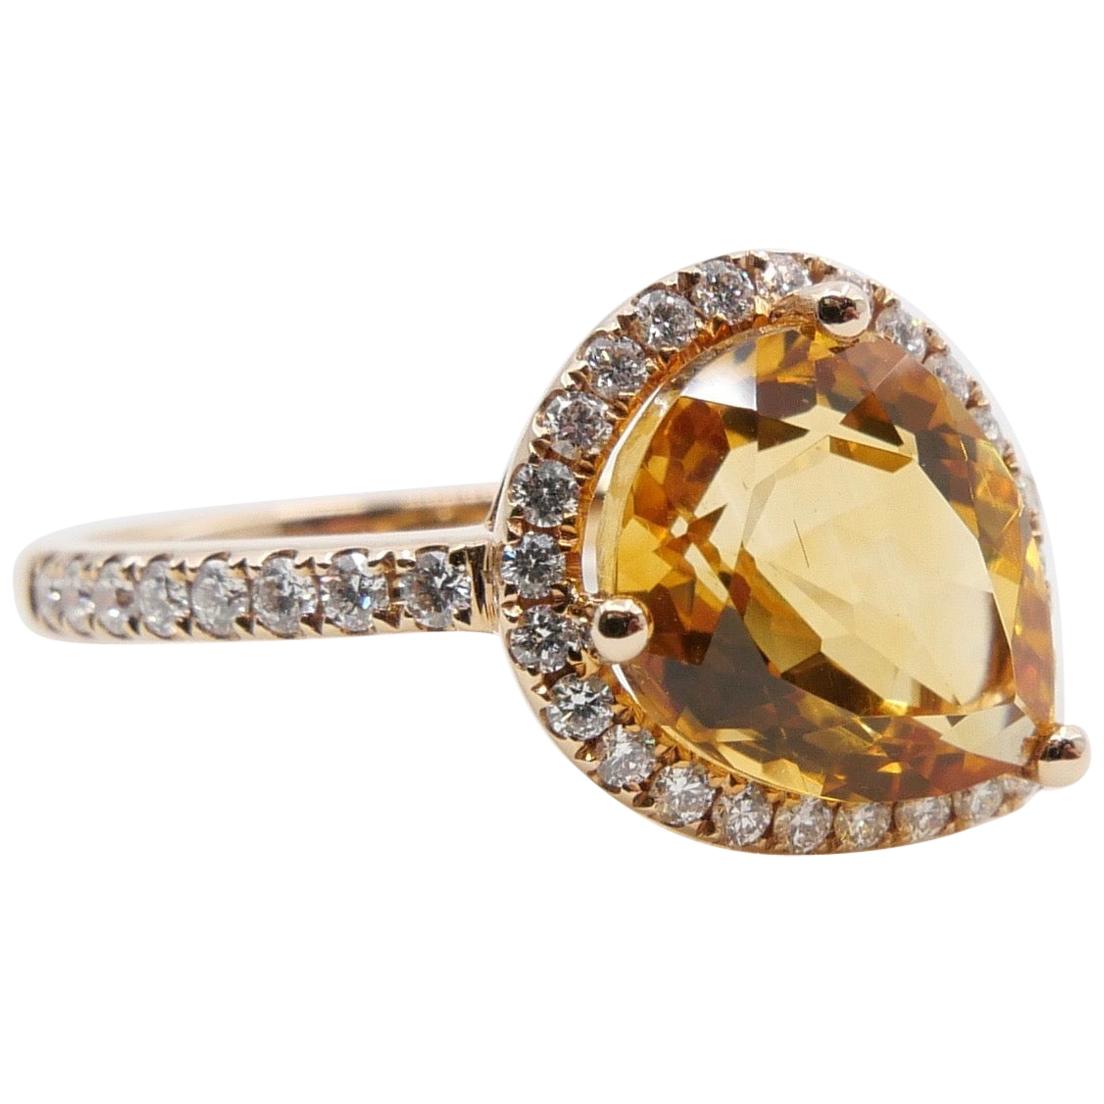 2.38 Carat Citrine and Diamond Cocktail Ring Set in Rose Gold For Sale 1